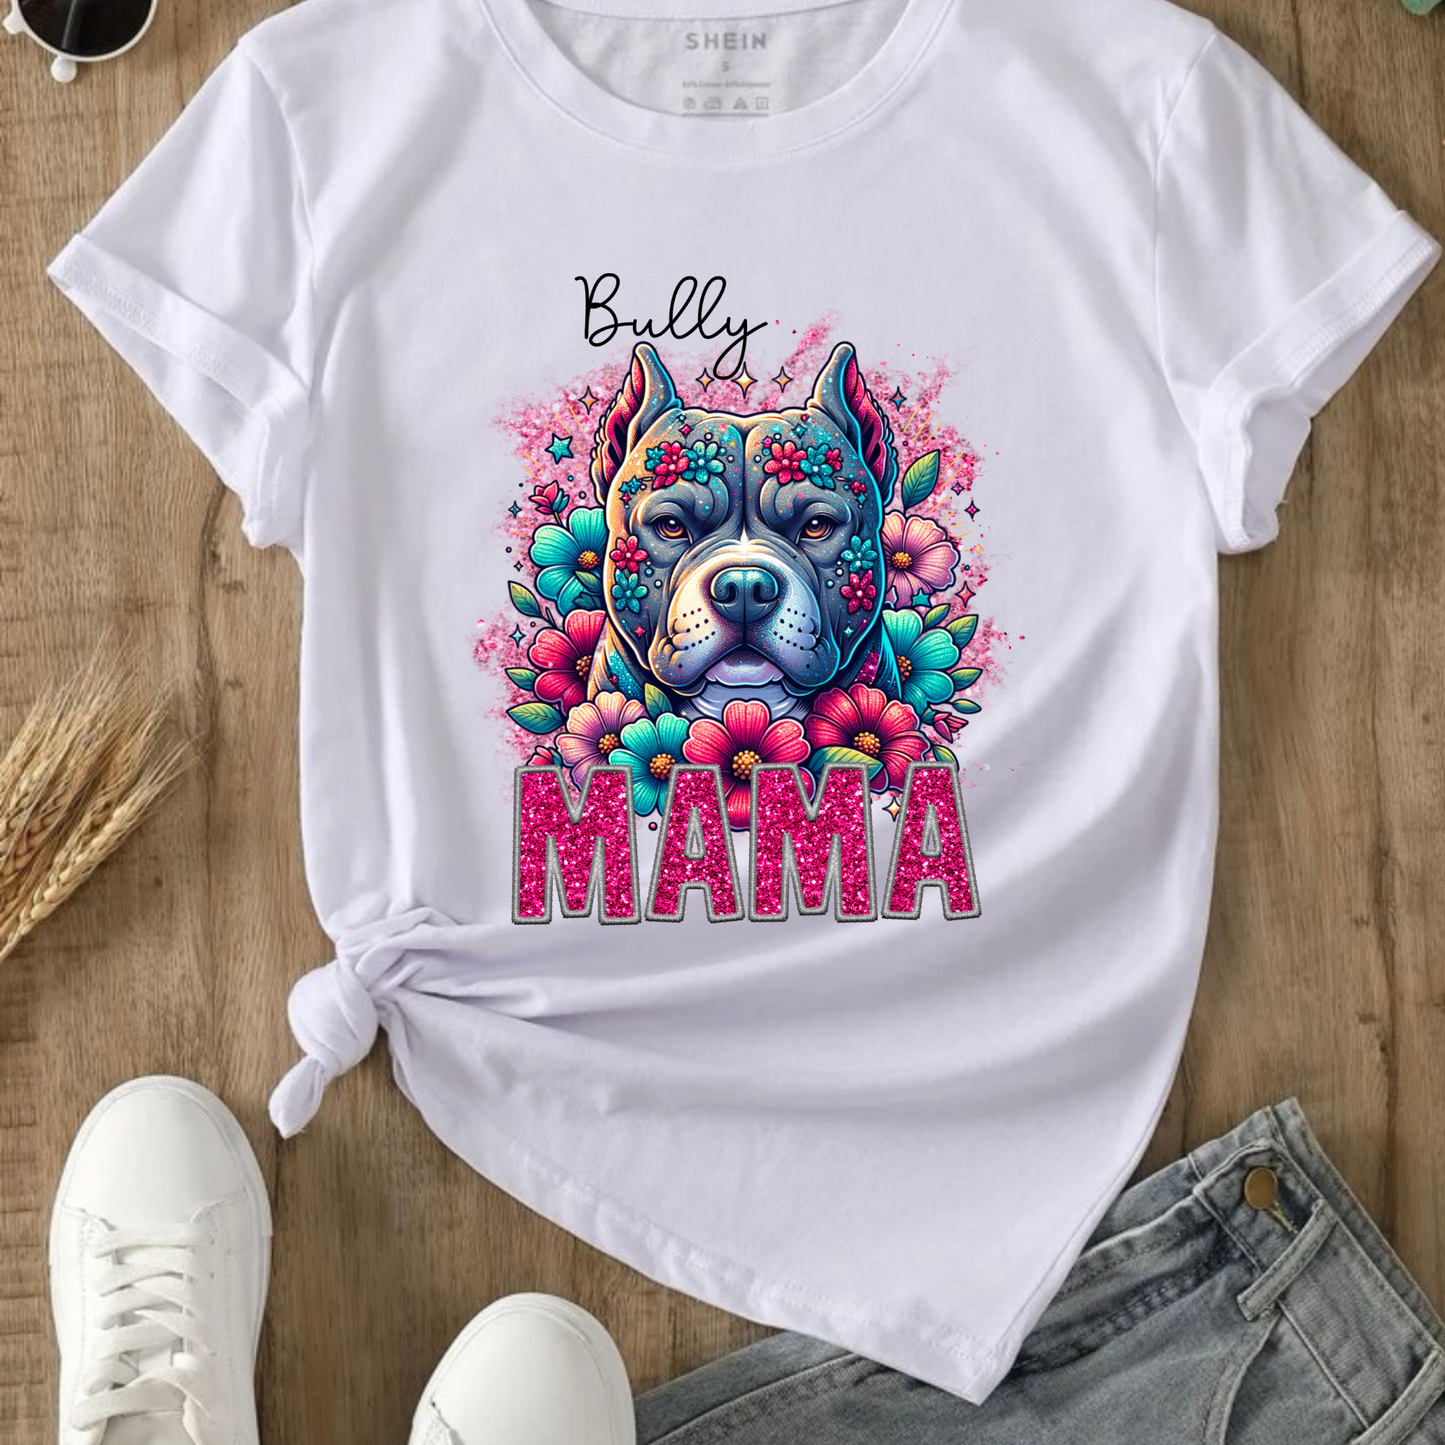 BULLY MAMA DESIGN! YOU CHOOSE COLOR AND STYLE! TEE OR CREWNECK! BLEACHED OR NON-BLEACHED